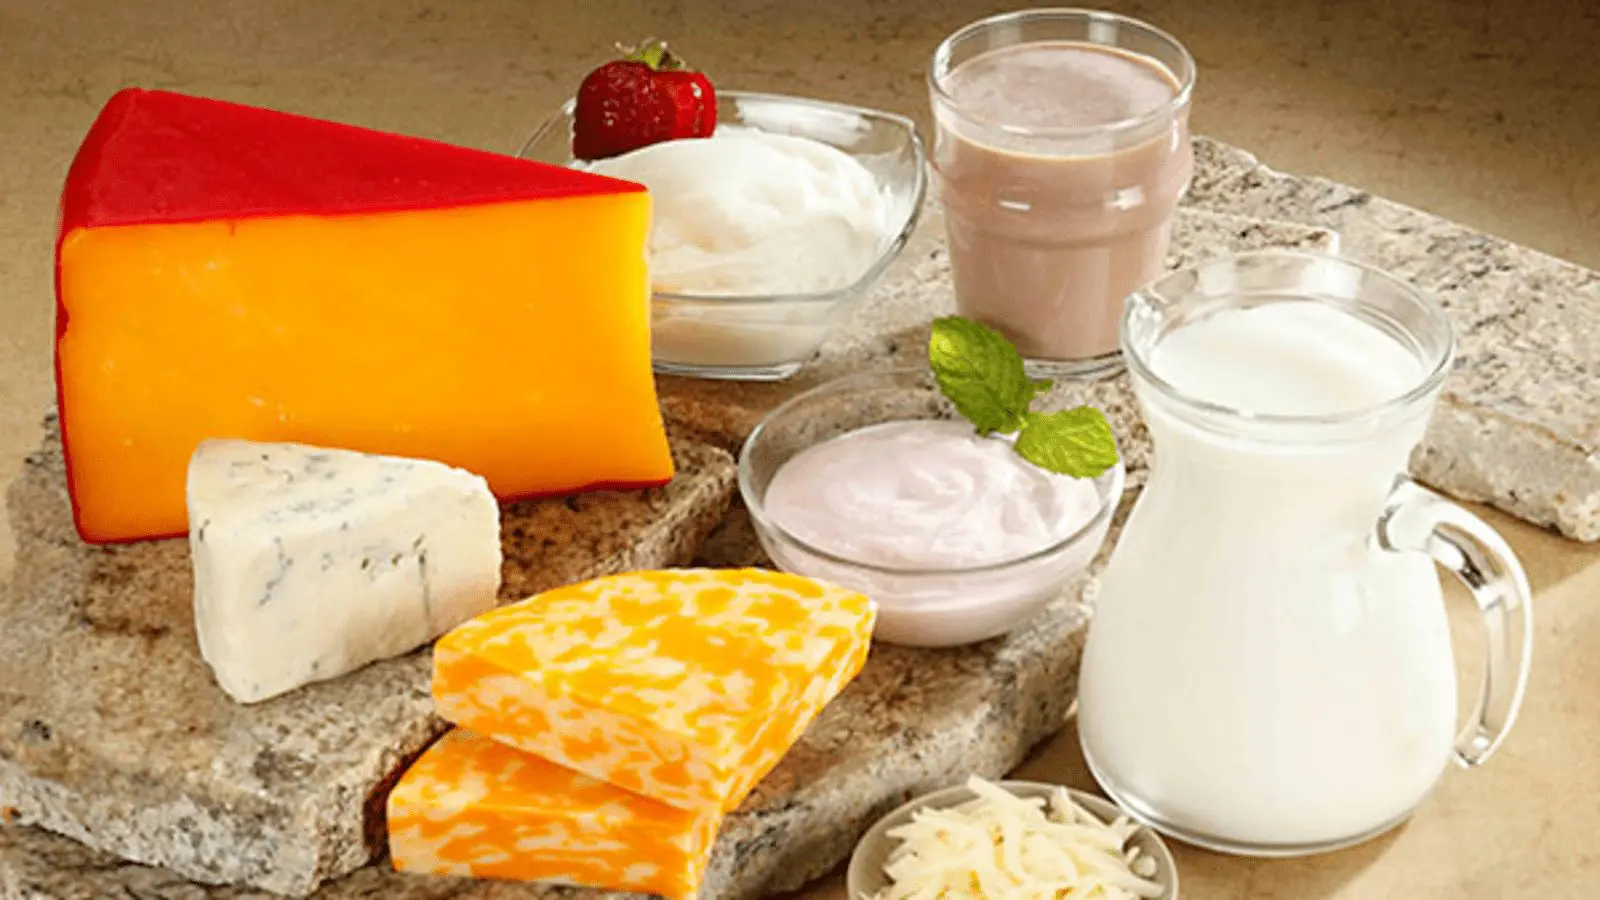 New Dairy Manufacturing Africa event to connect dairy industry in Africa and globally